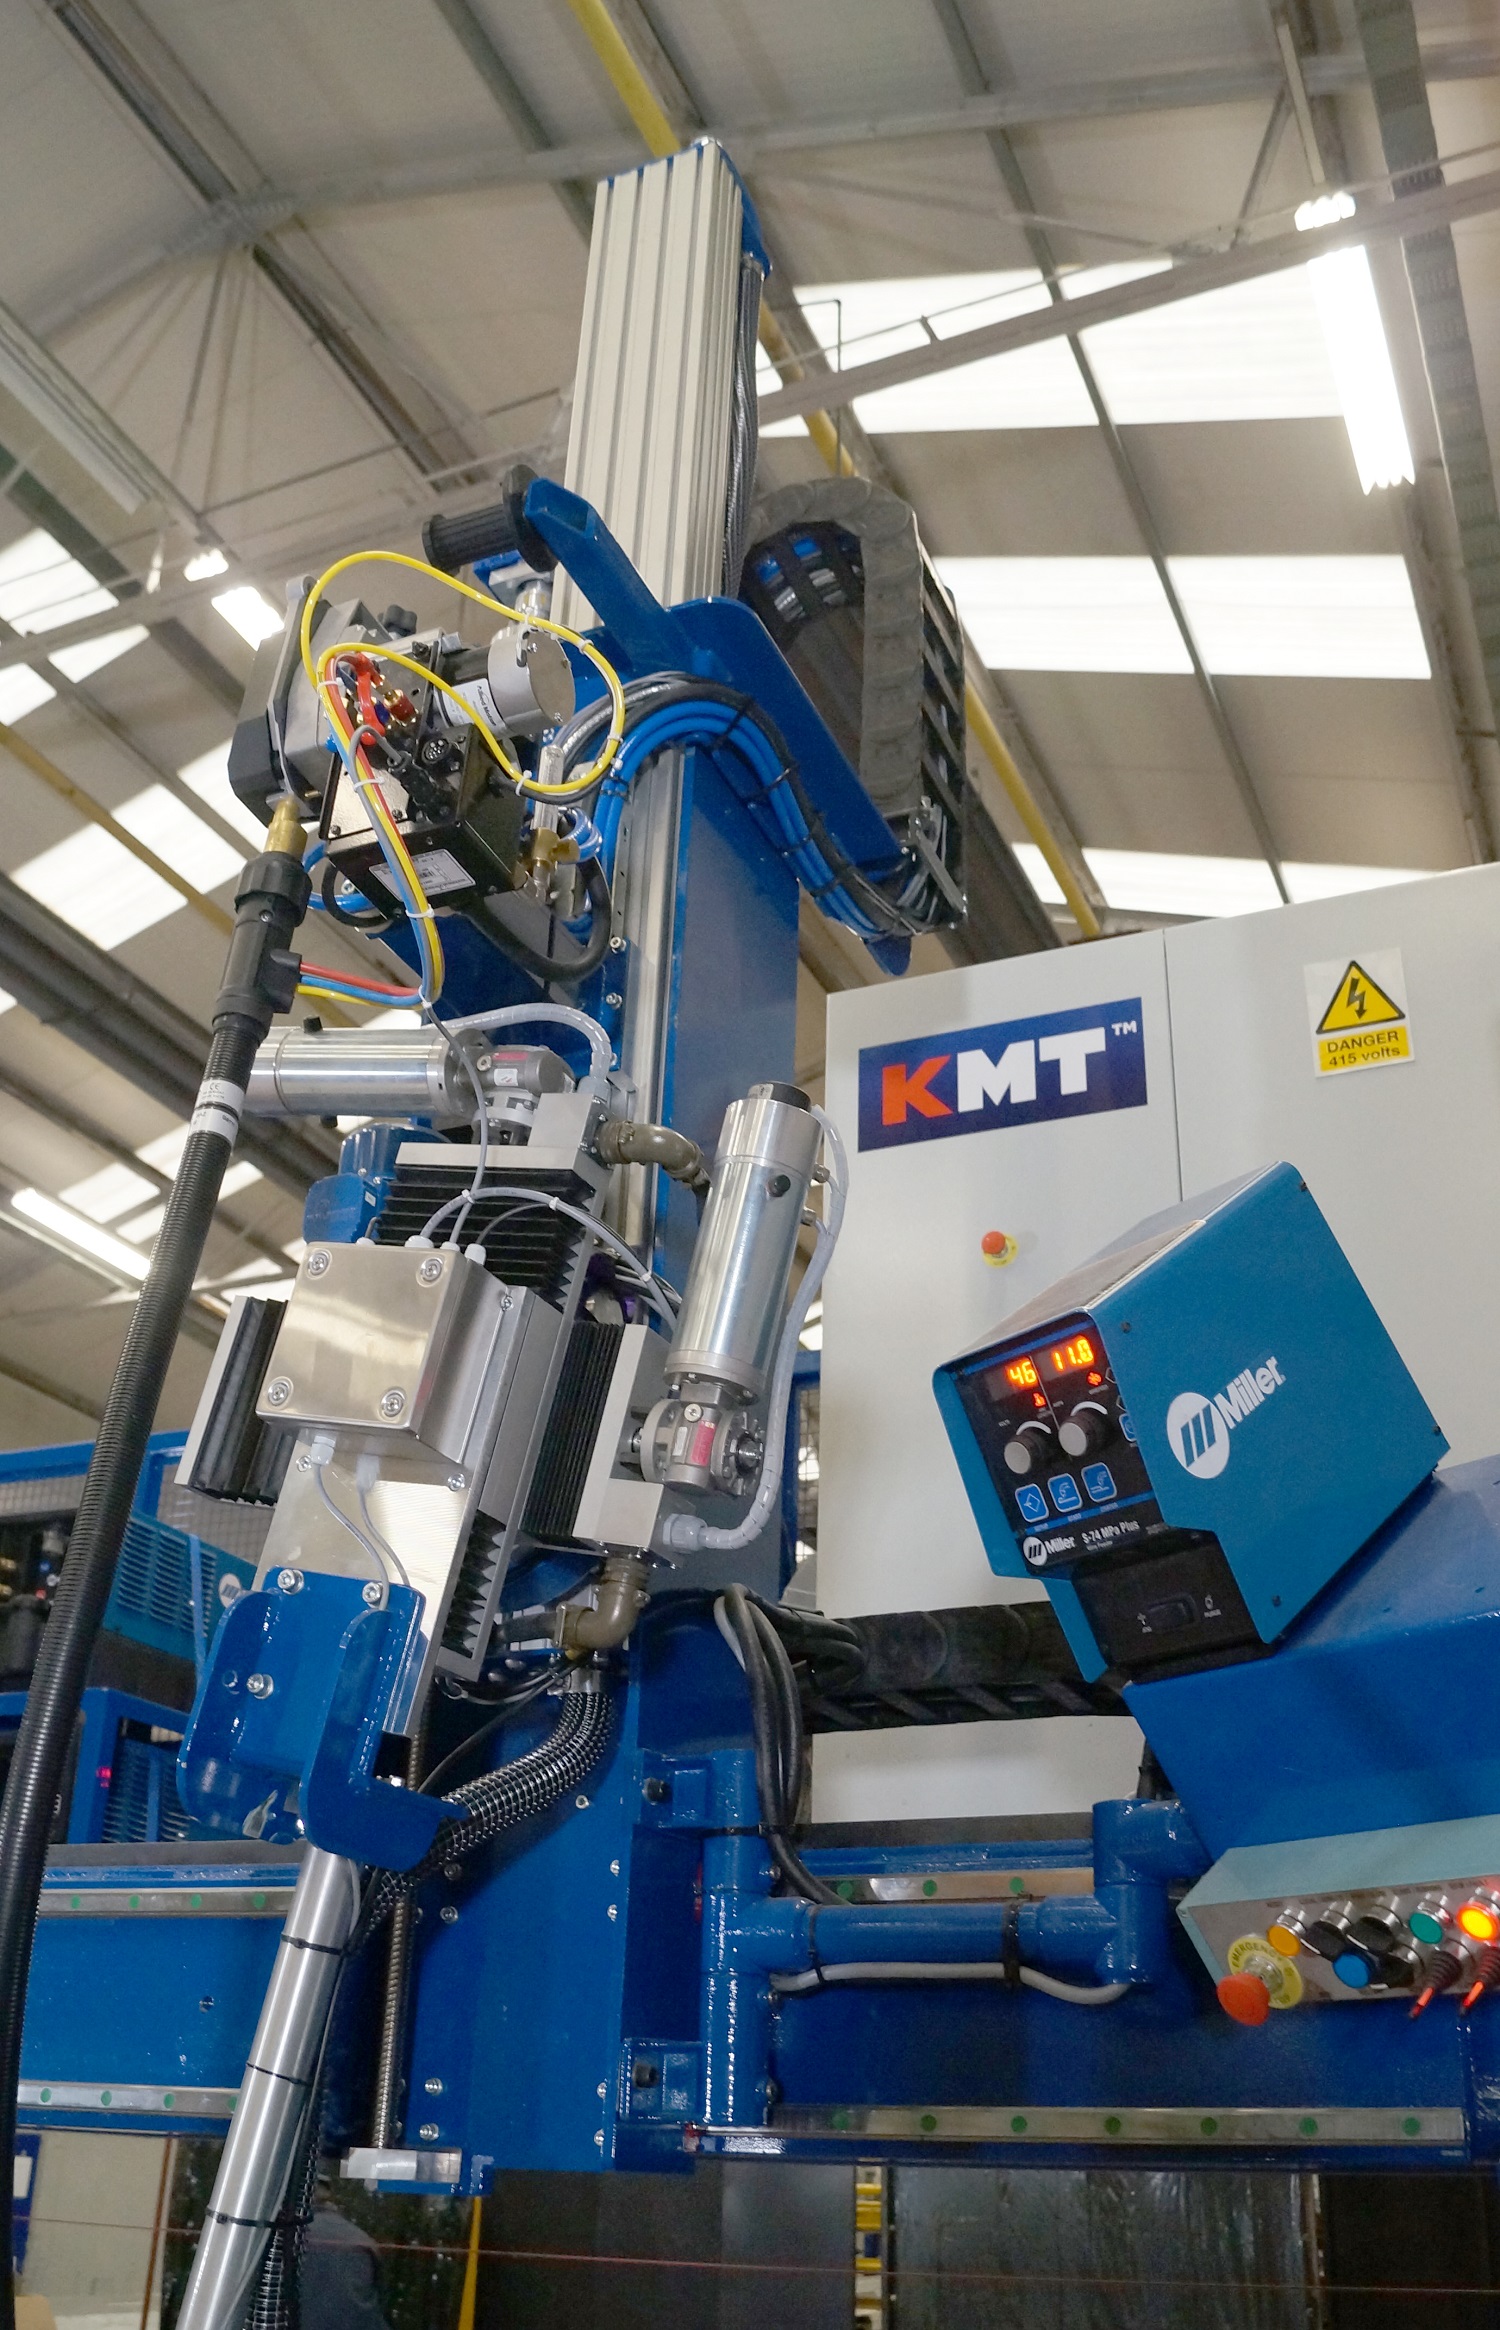 Bombardier required a new welding gantry that closely matched those already operational on-site.